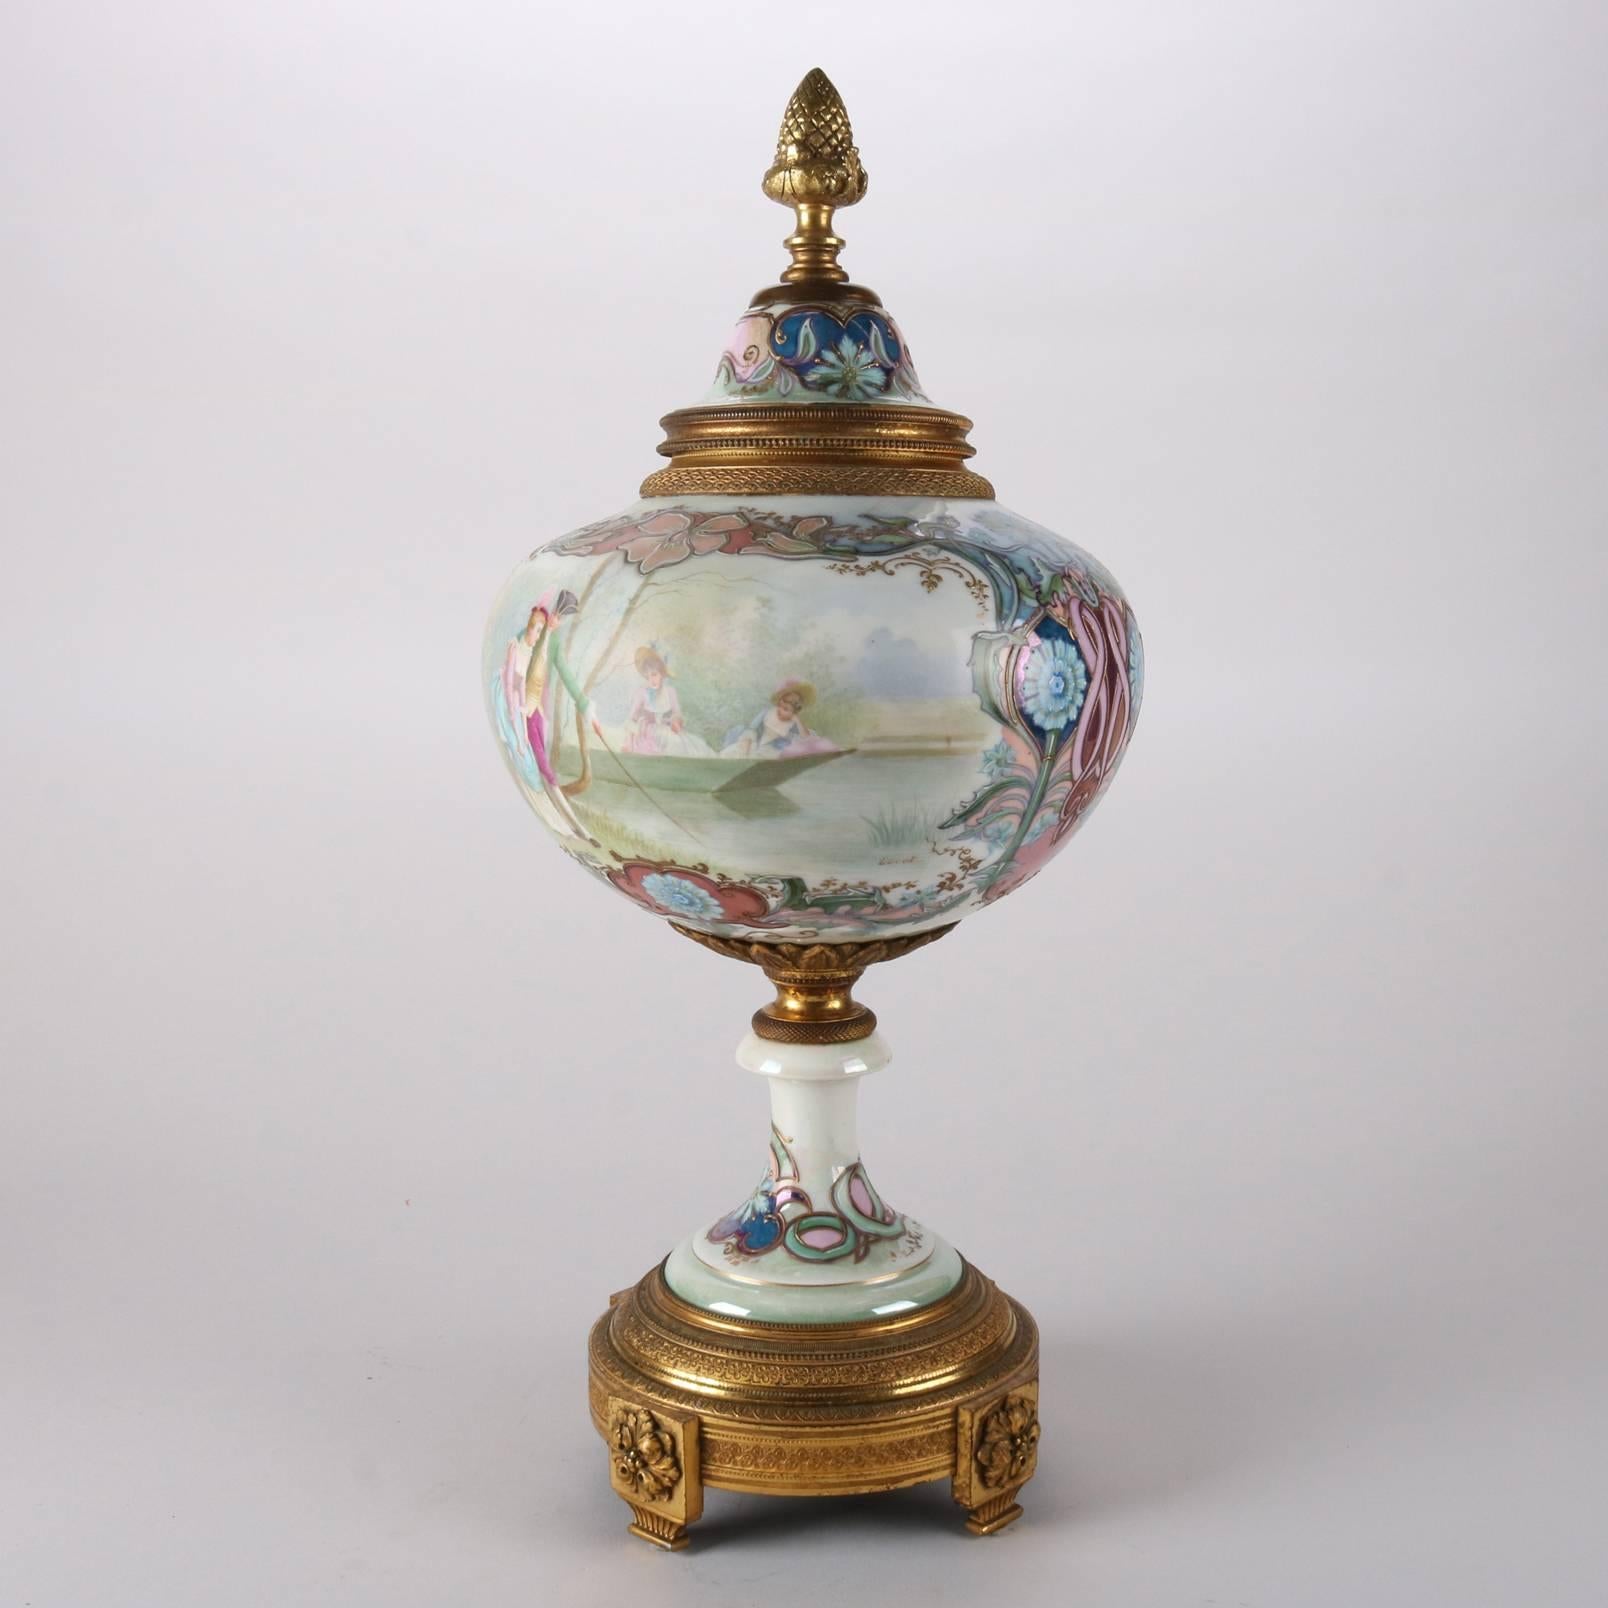 Antique French Sevres Hand-Painted Porcelain Urn with Bronze, Signed Lucot 1